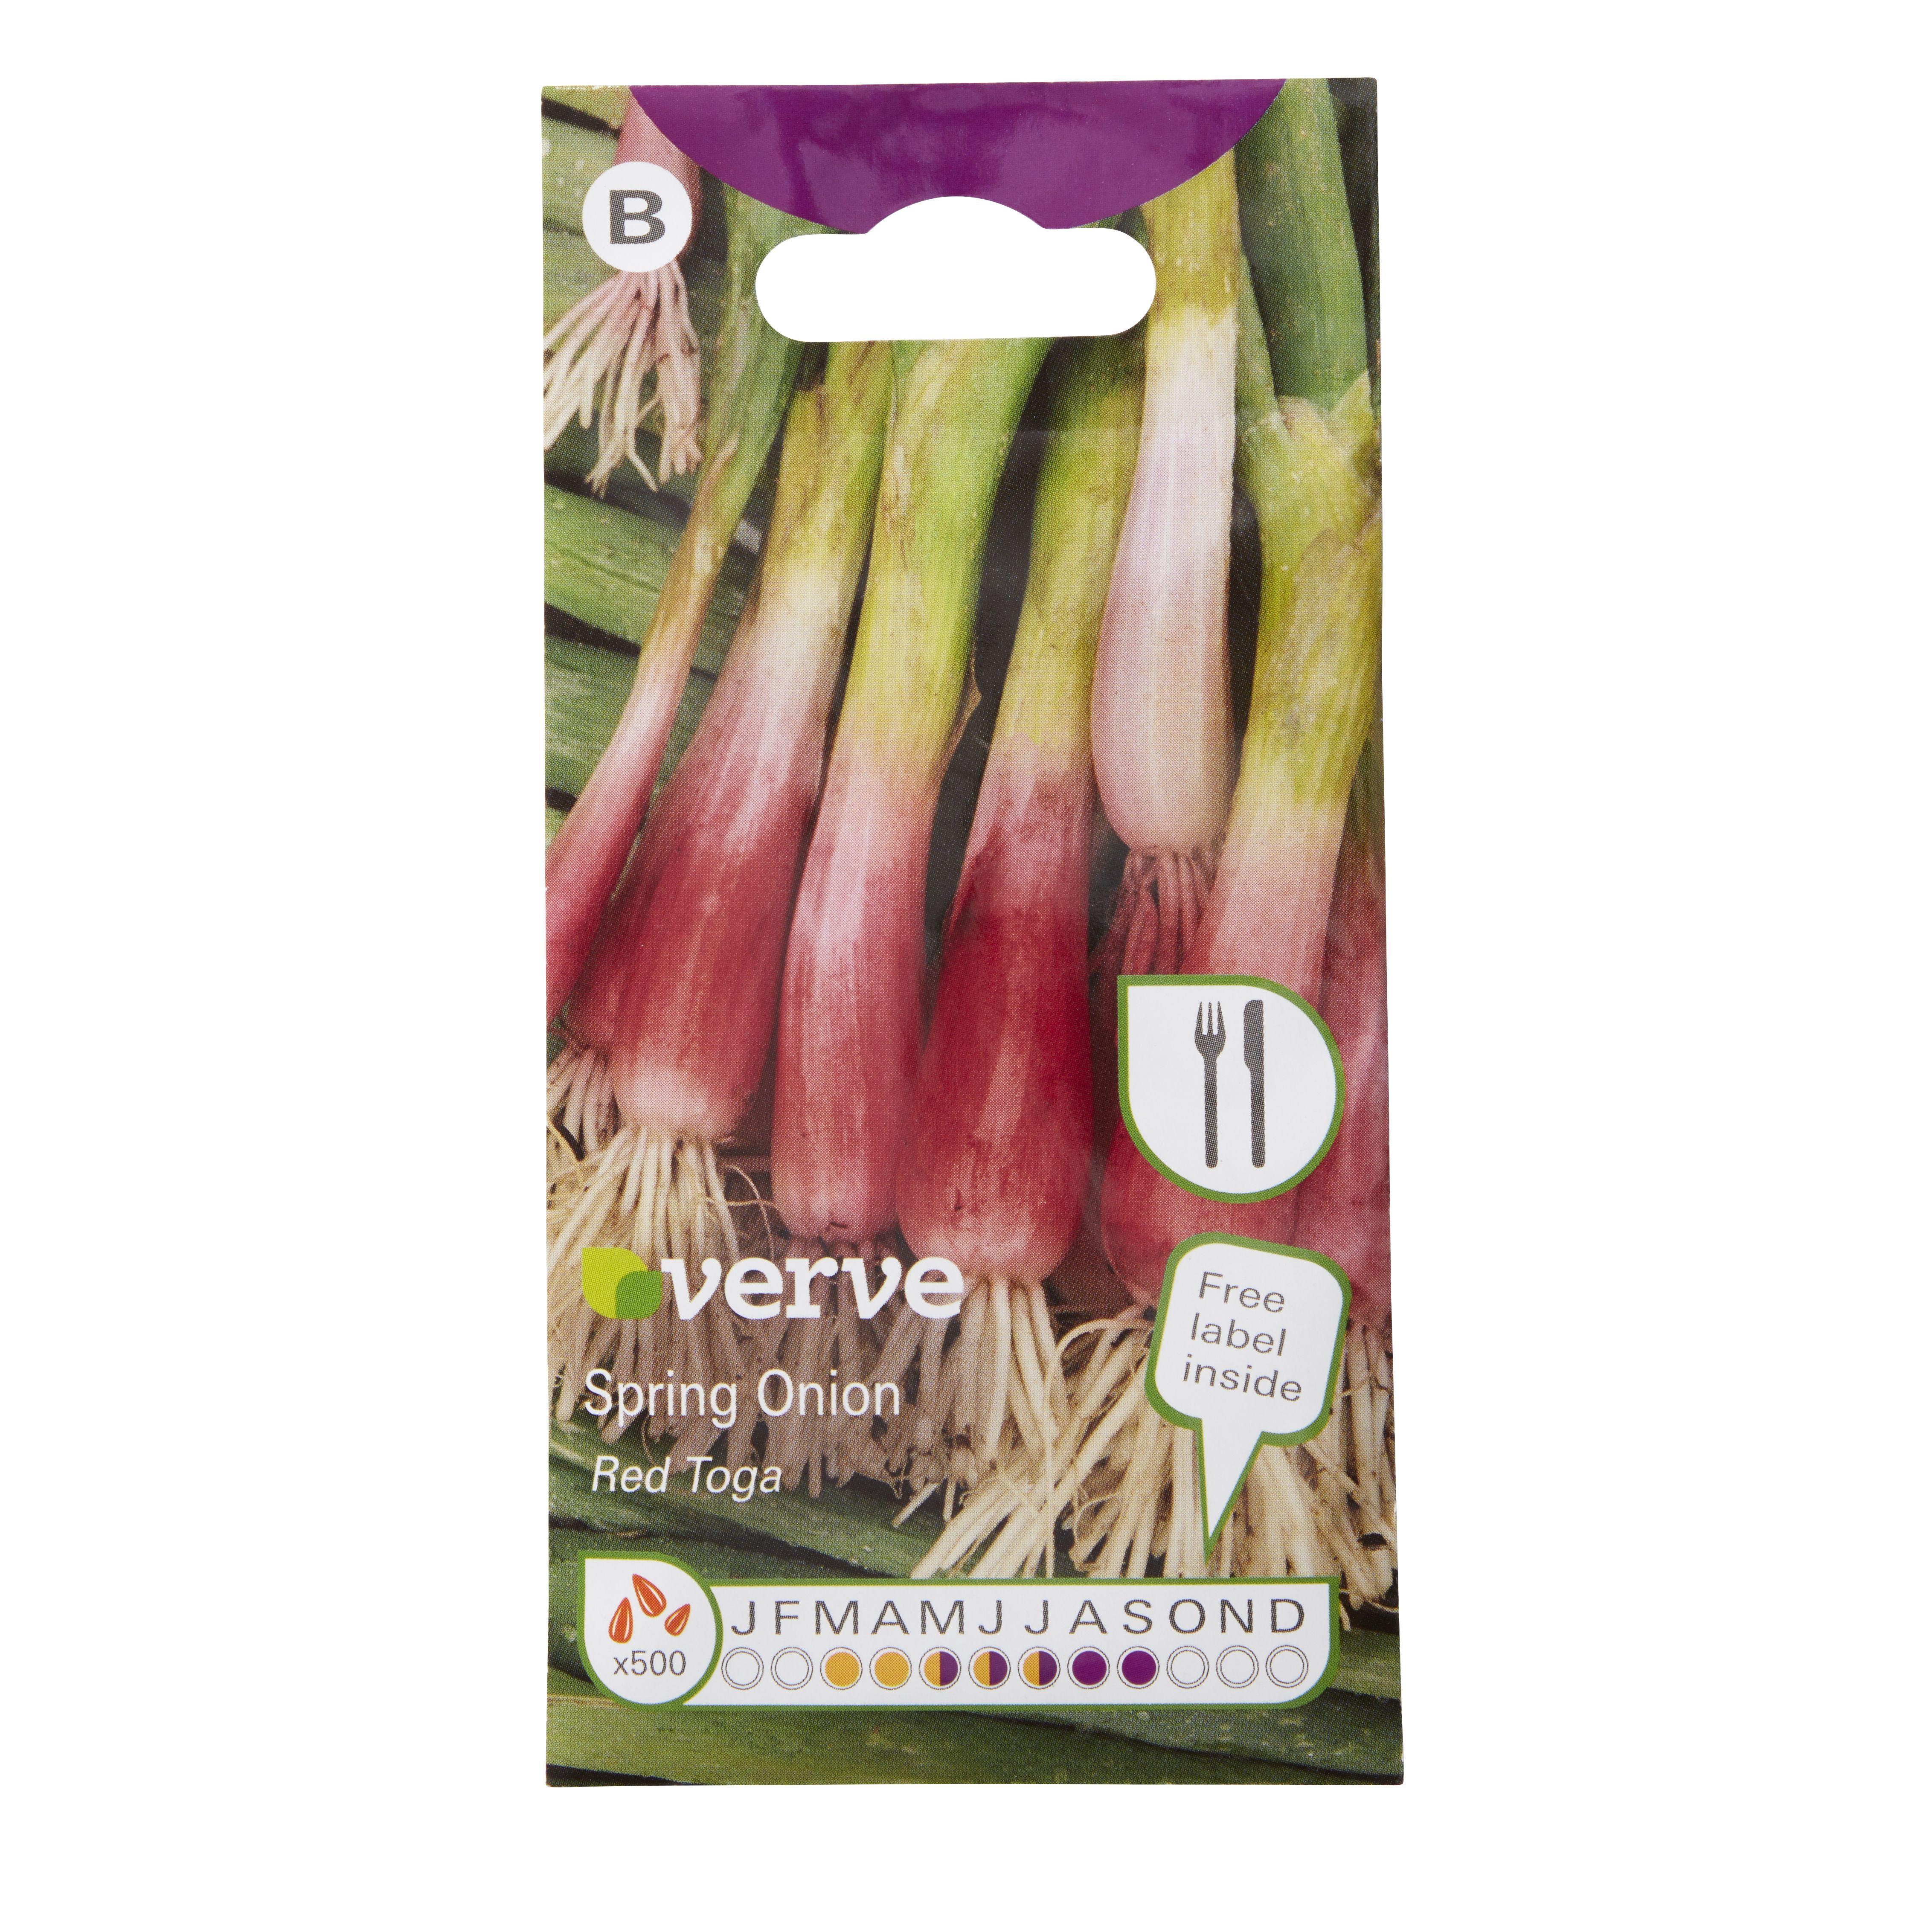 Red toga spring onion Spring onion Seed